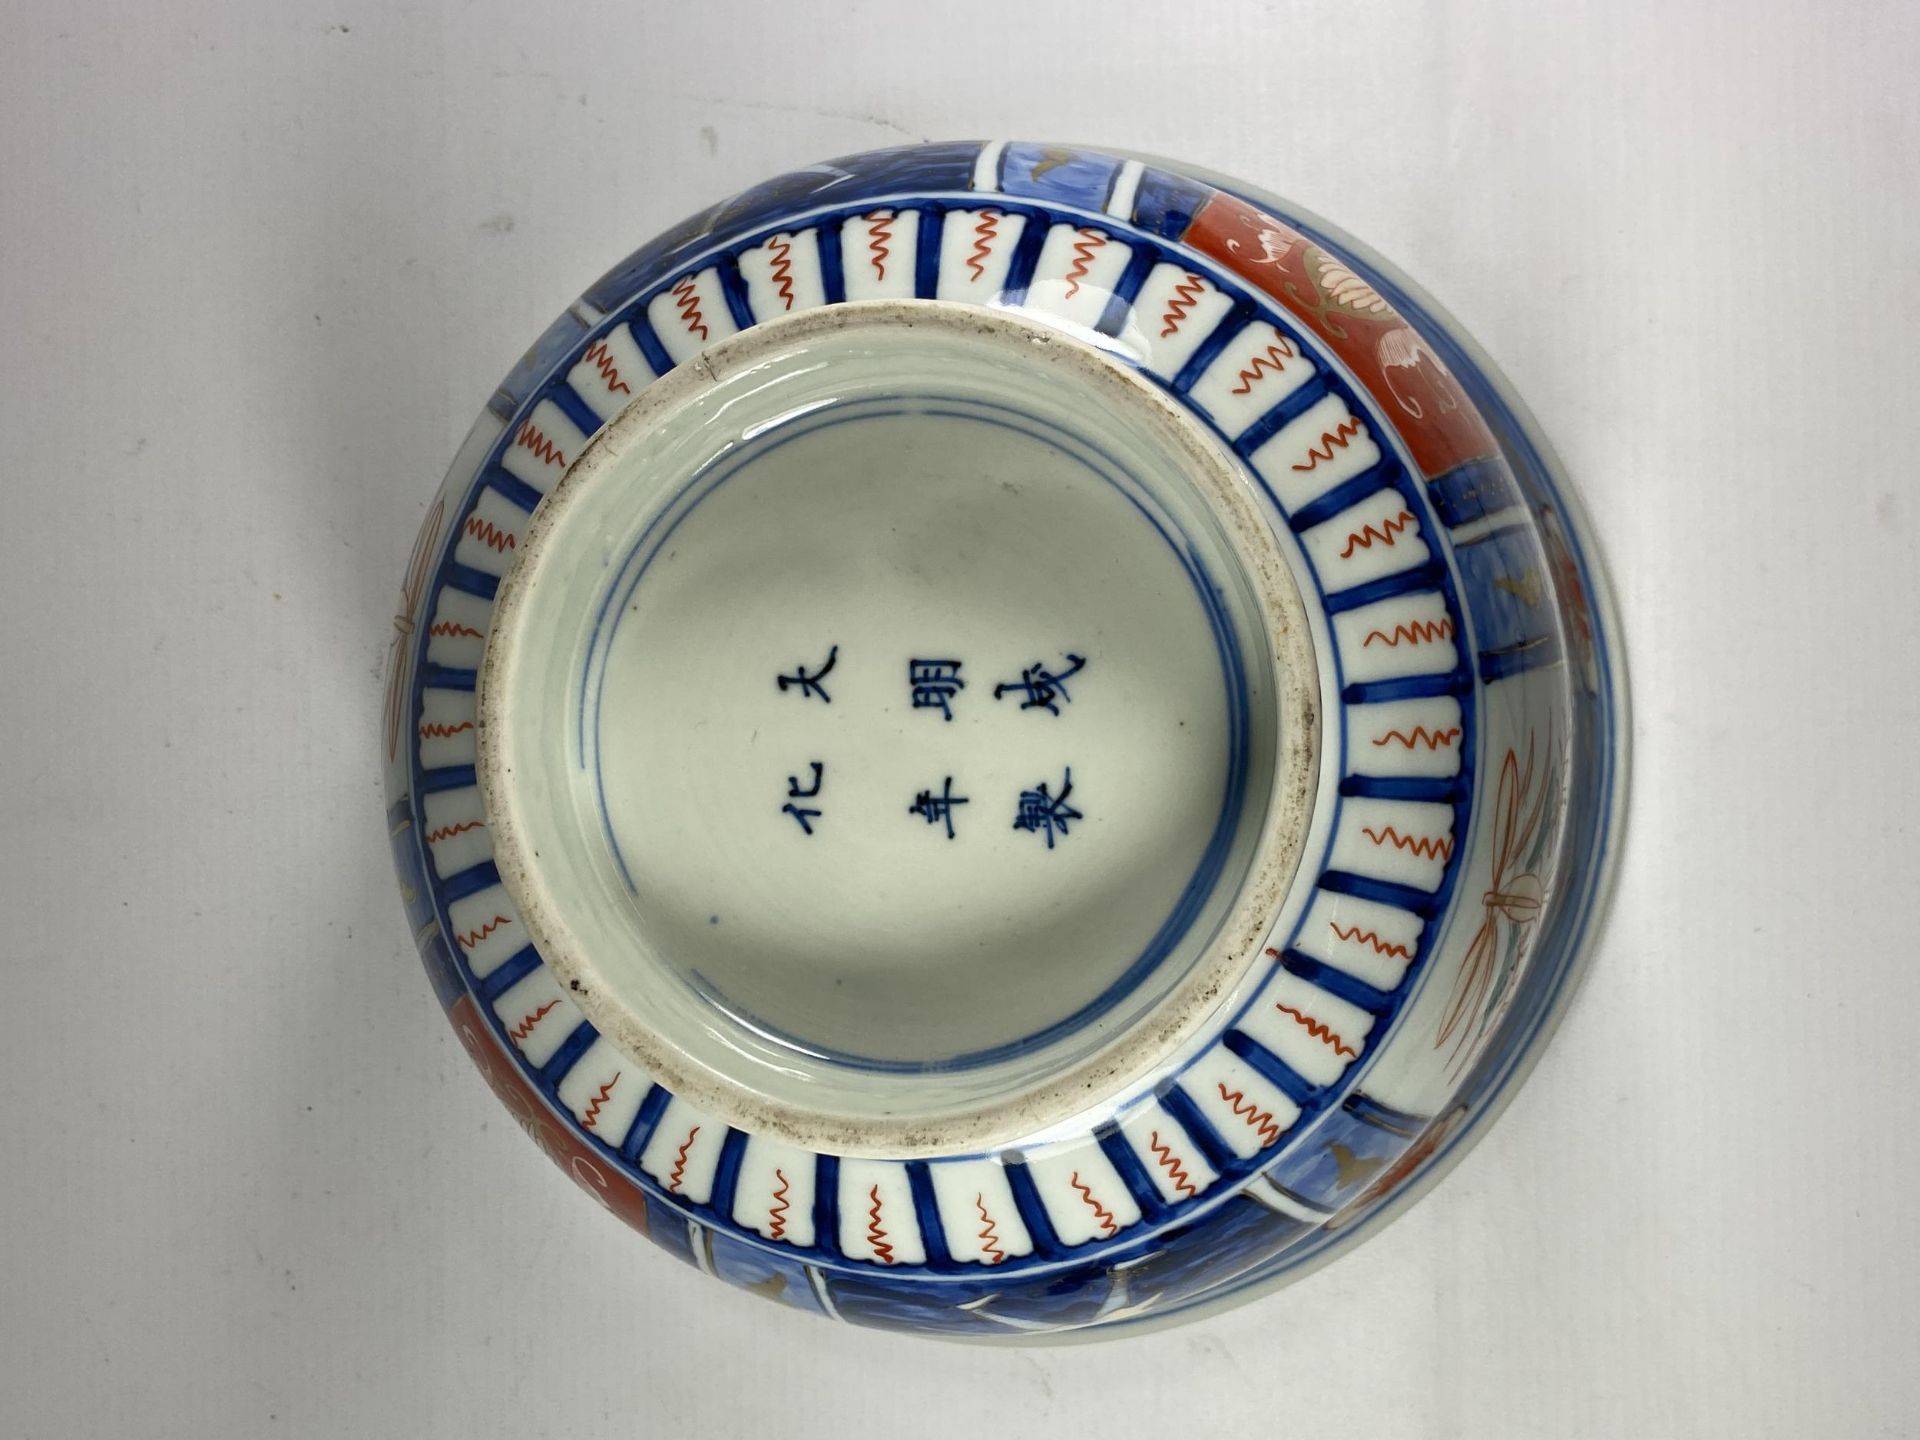 A LARGE JAPANESE MEIJI PERIOD (1868-1912) IMARI BOWL WITH SIX CHARACTER MARK TO BASE, DIAMETER 25. - Image 5 of 8